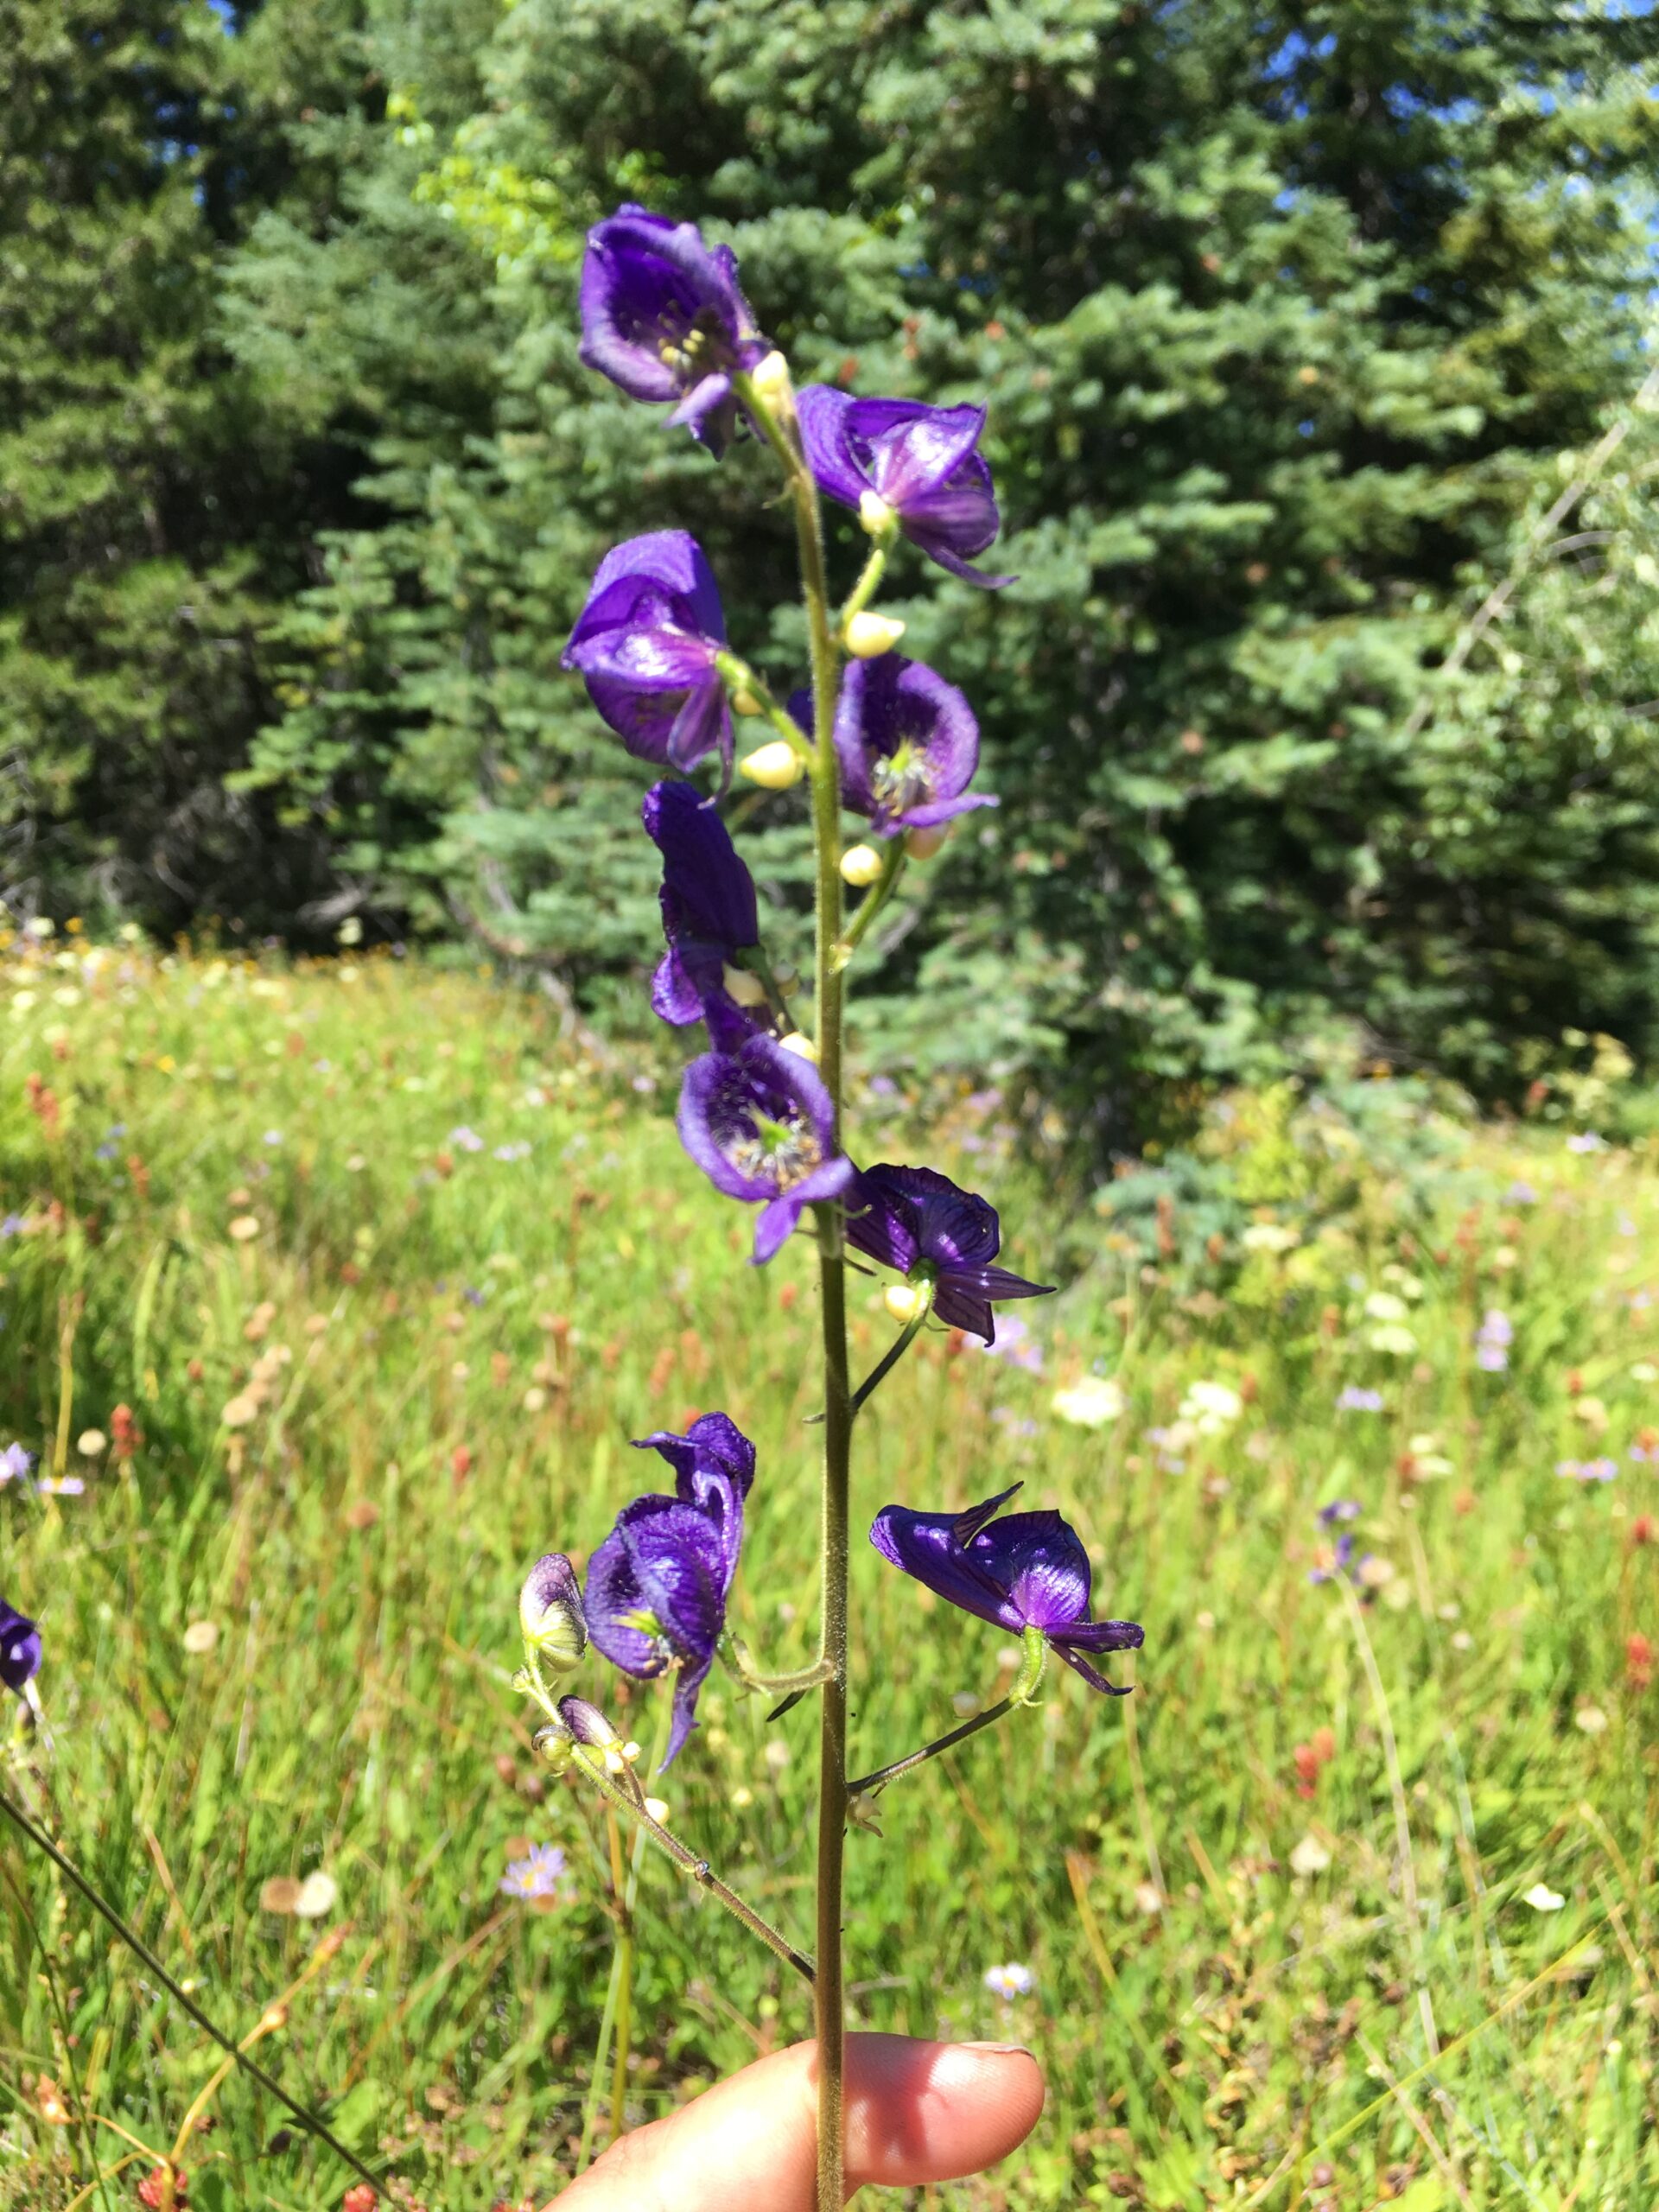 Color photo of a bright purple wildflower held by a person's hand in a meadow. The grass is bright green on a sunny day and there's a line of pine trees in the background.